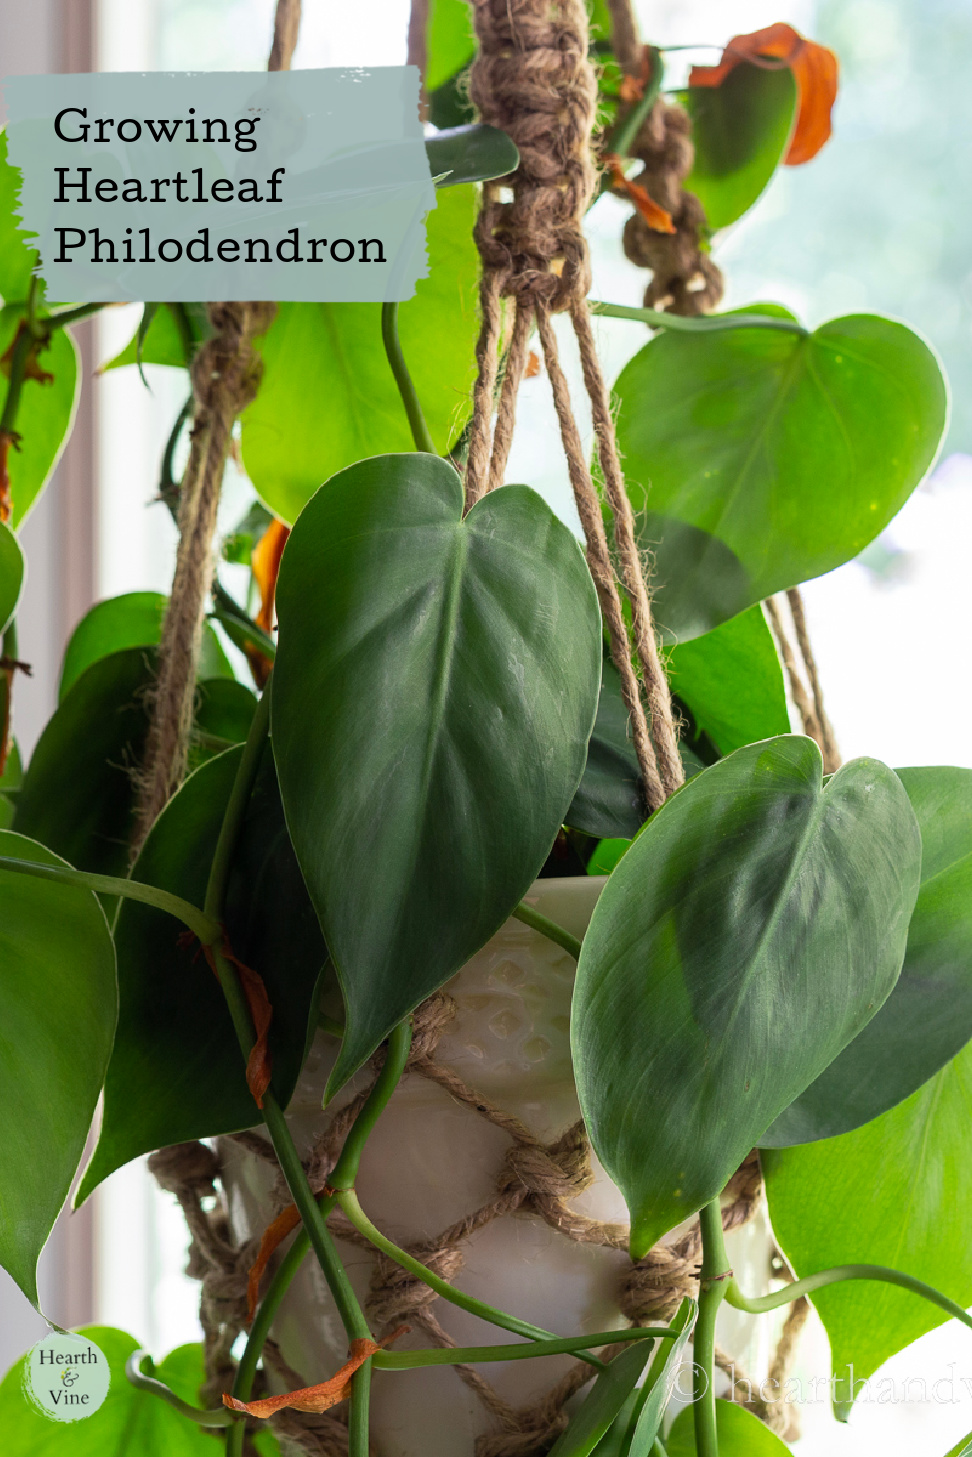 Green heartleaf Philodendron hanging in a window in a white pot.